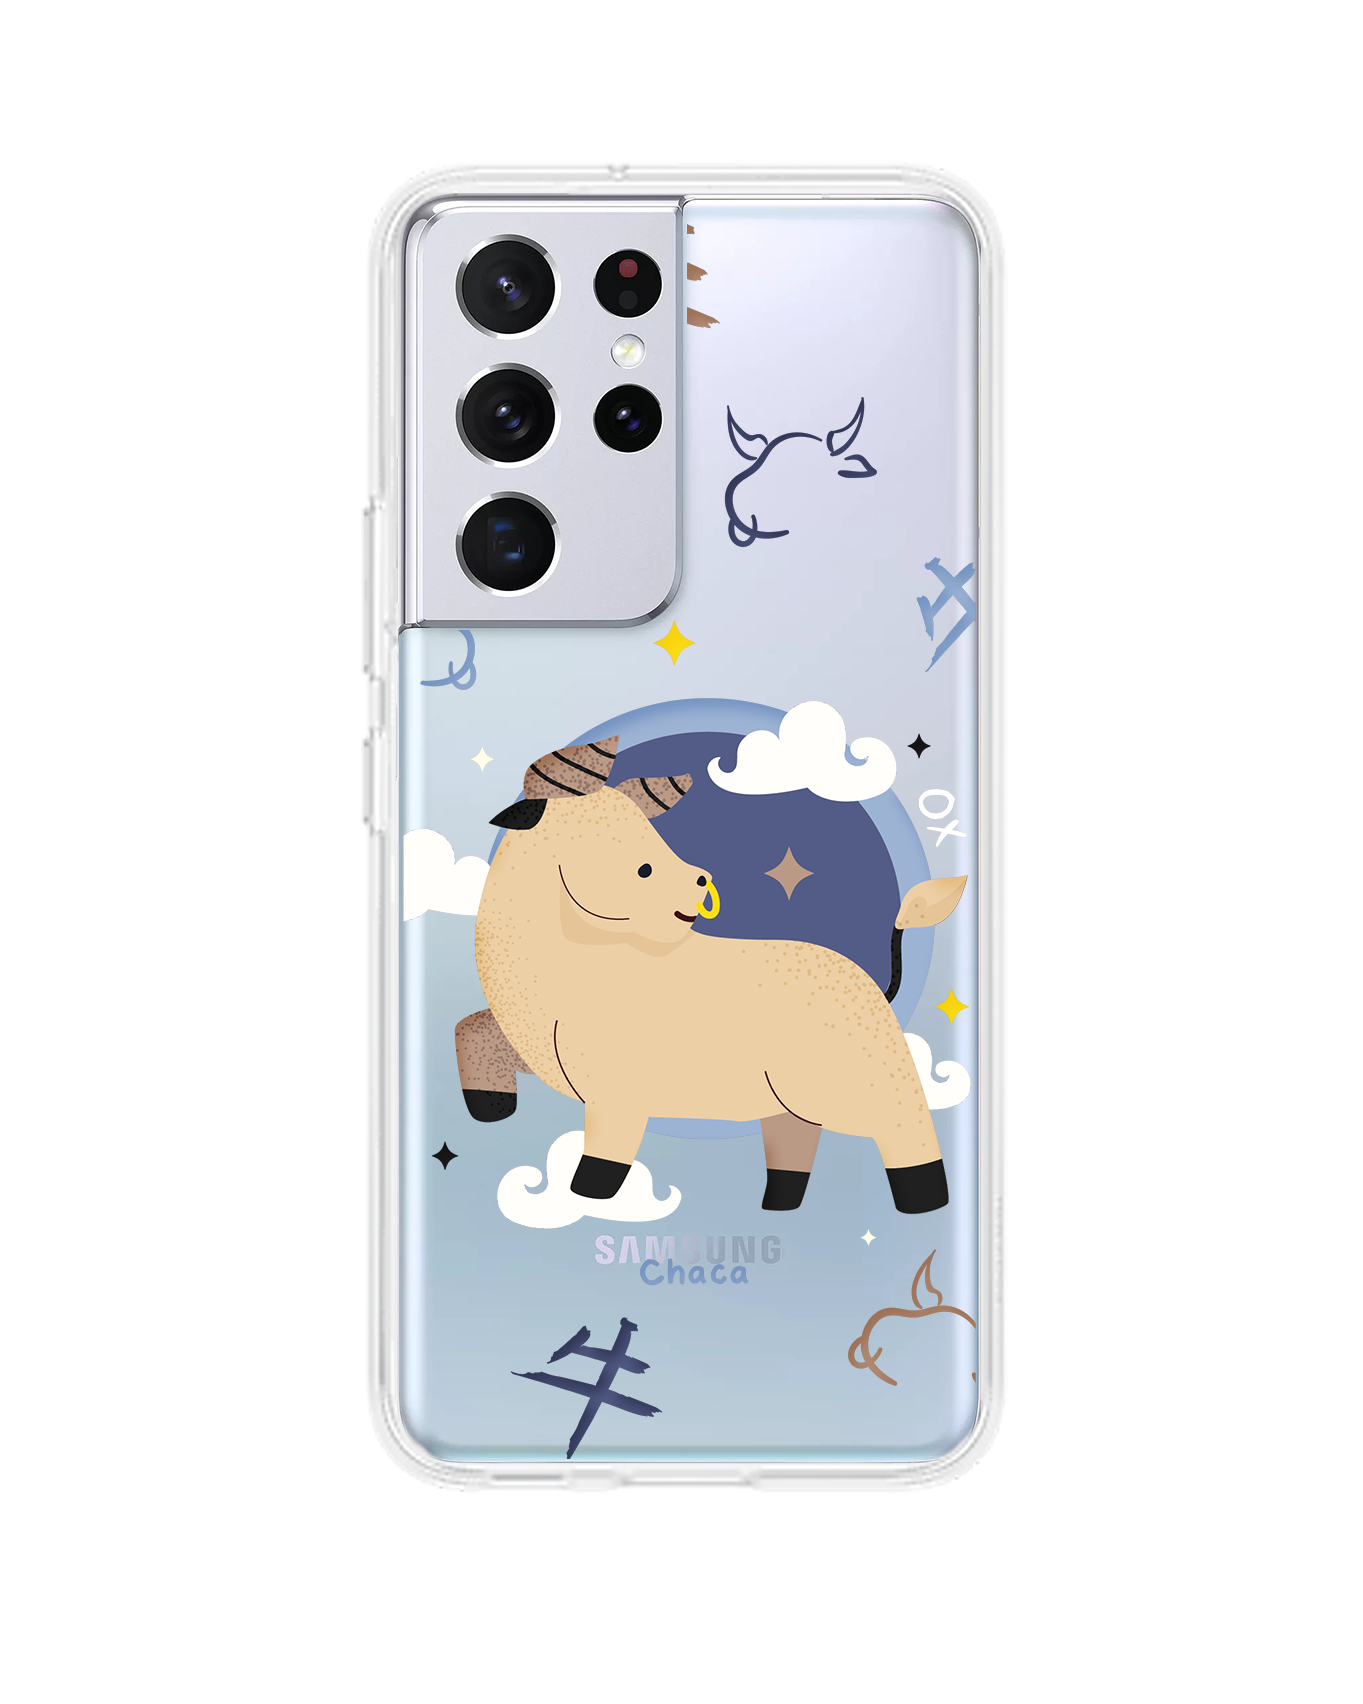 Android Rearguard Hybrid Case - Ox (Chinese Zodiac / Shio)